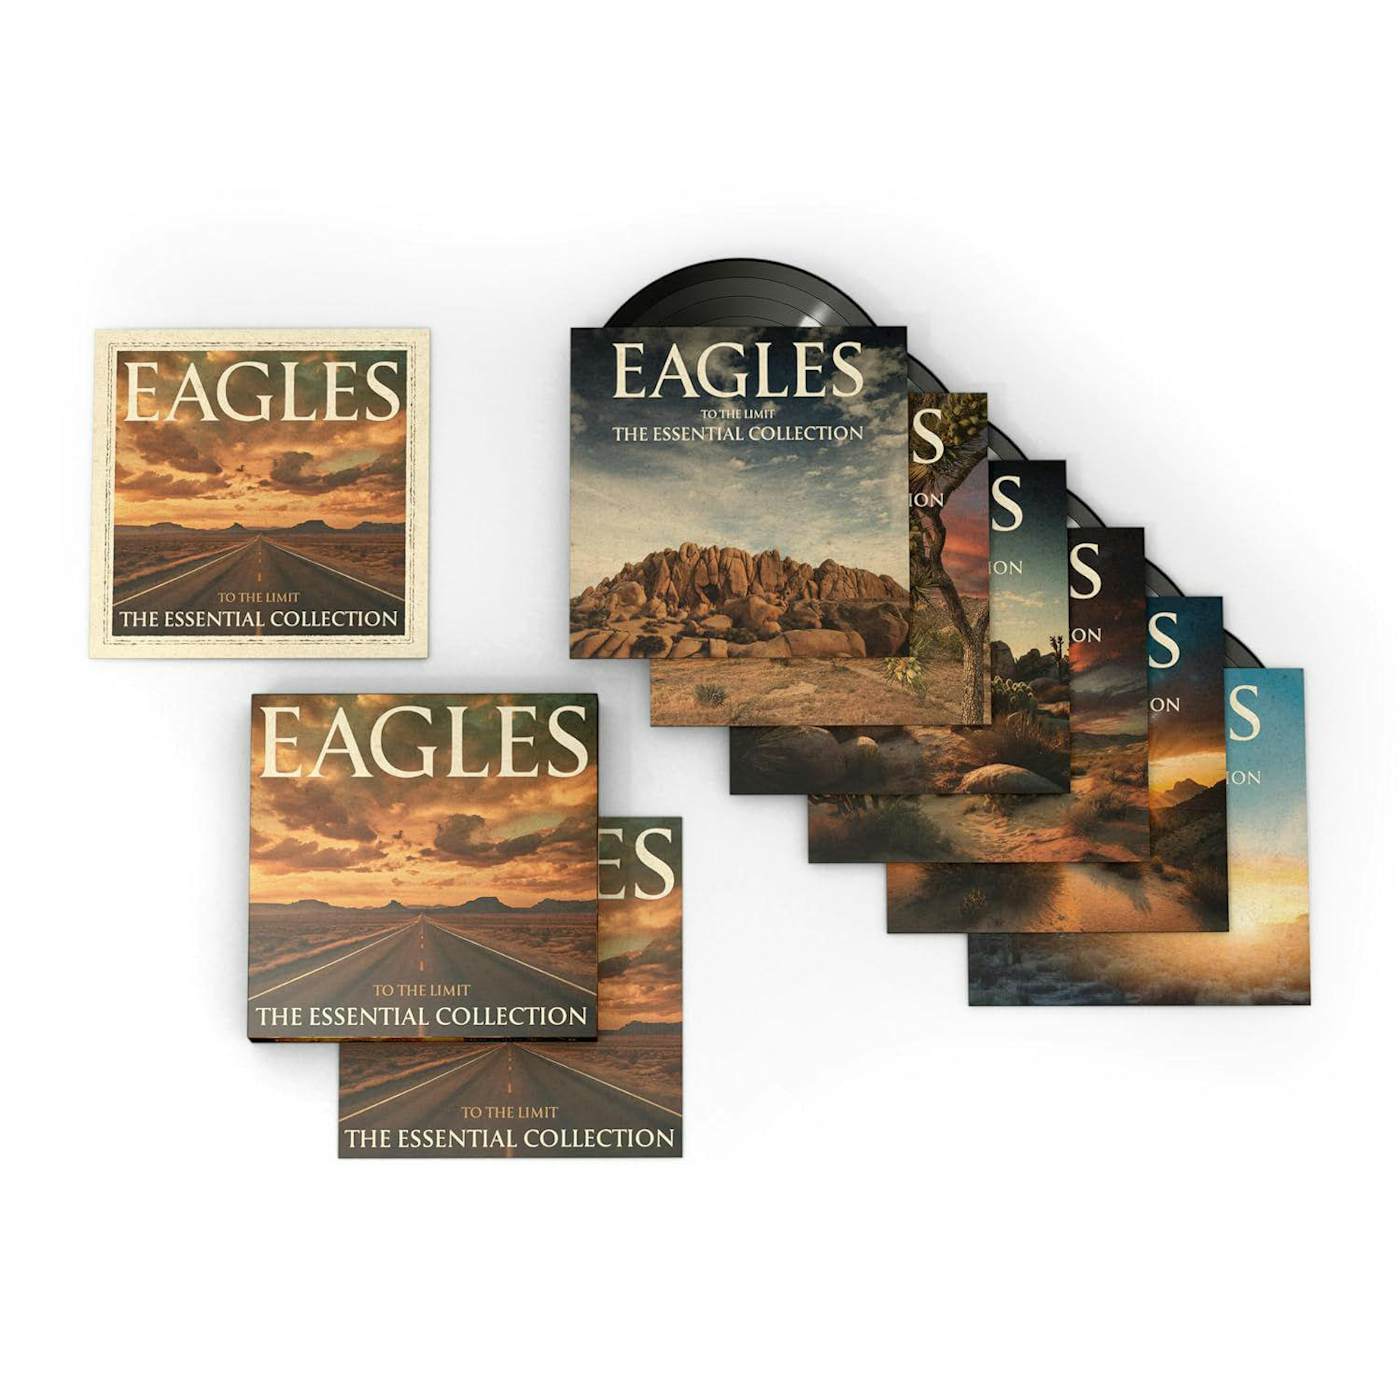 Eagles To The Limit: The Essential Collection Vinyl Record